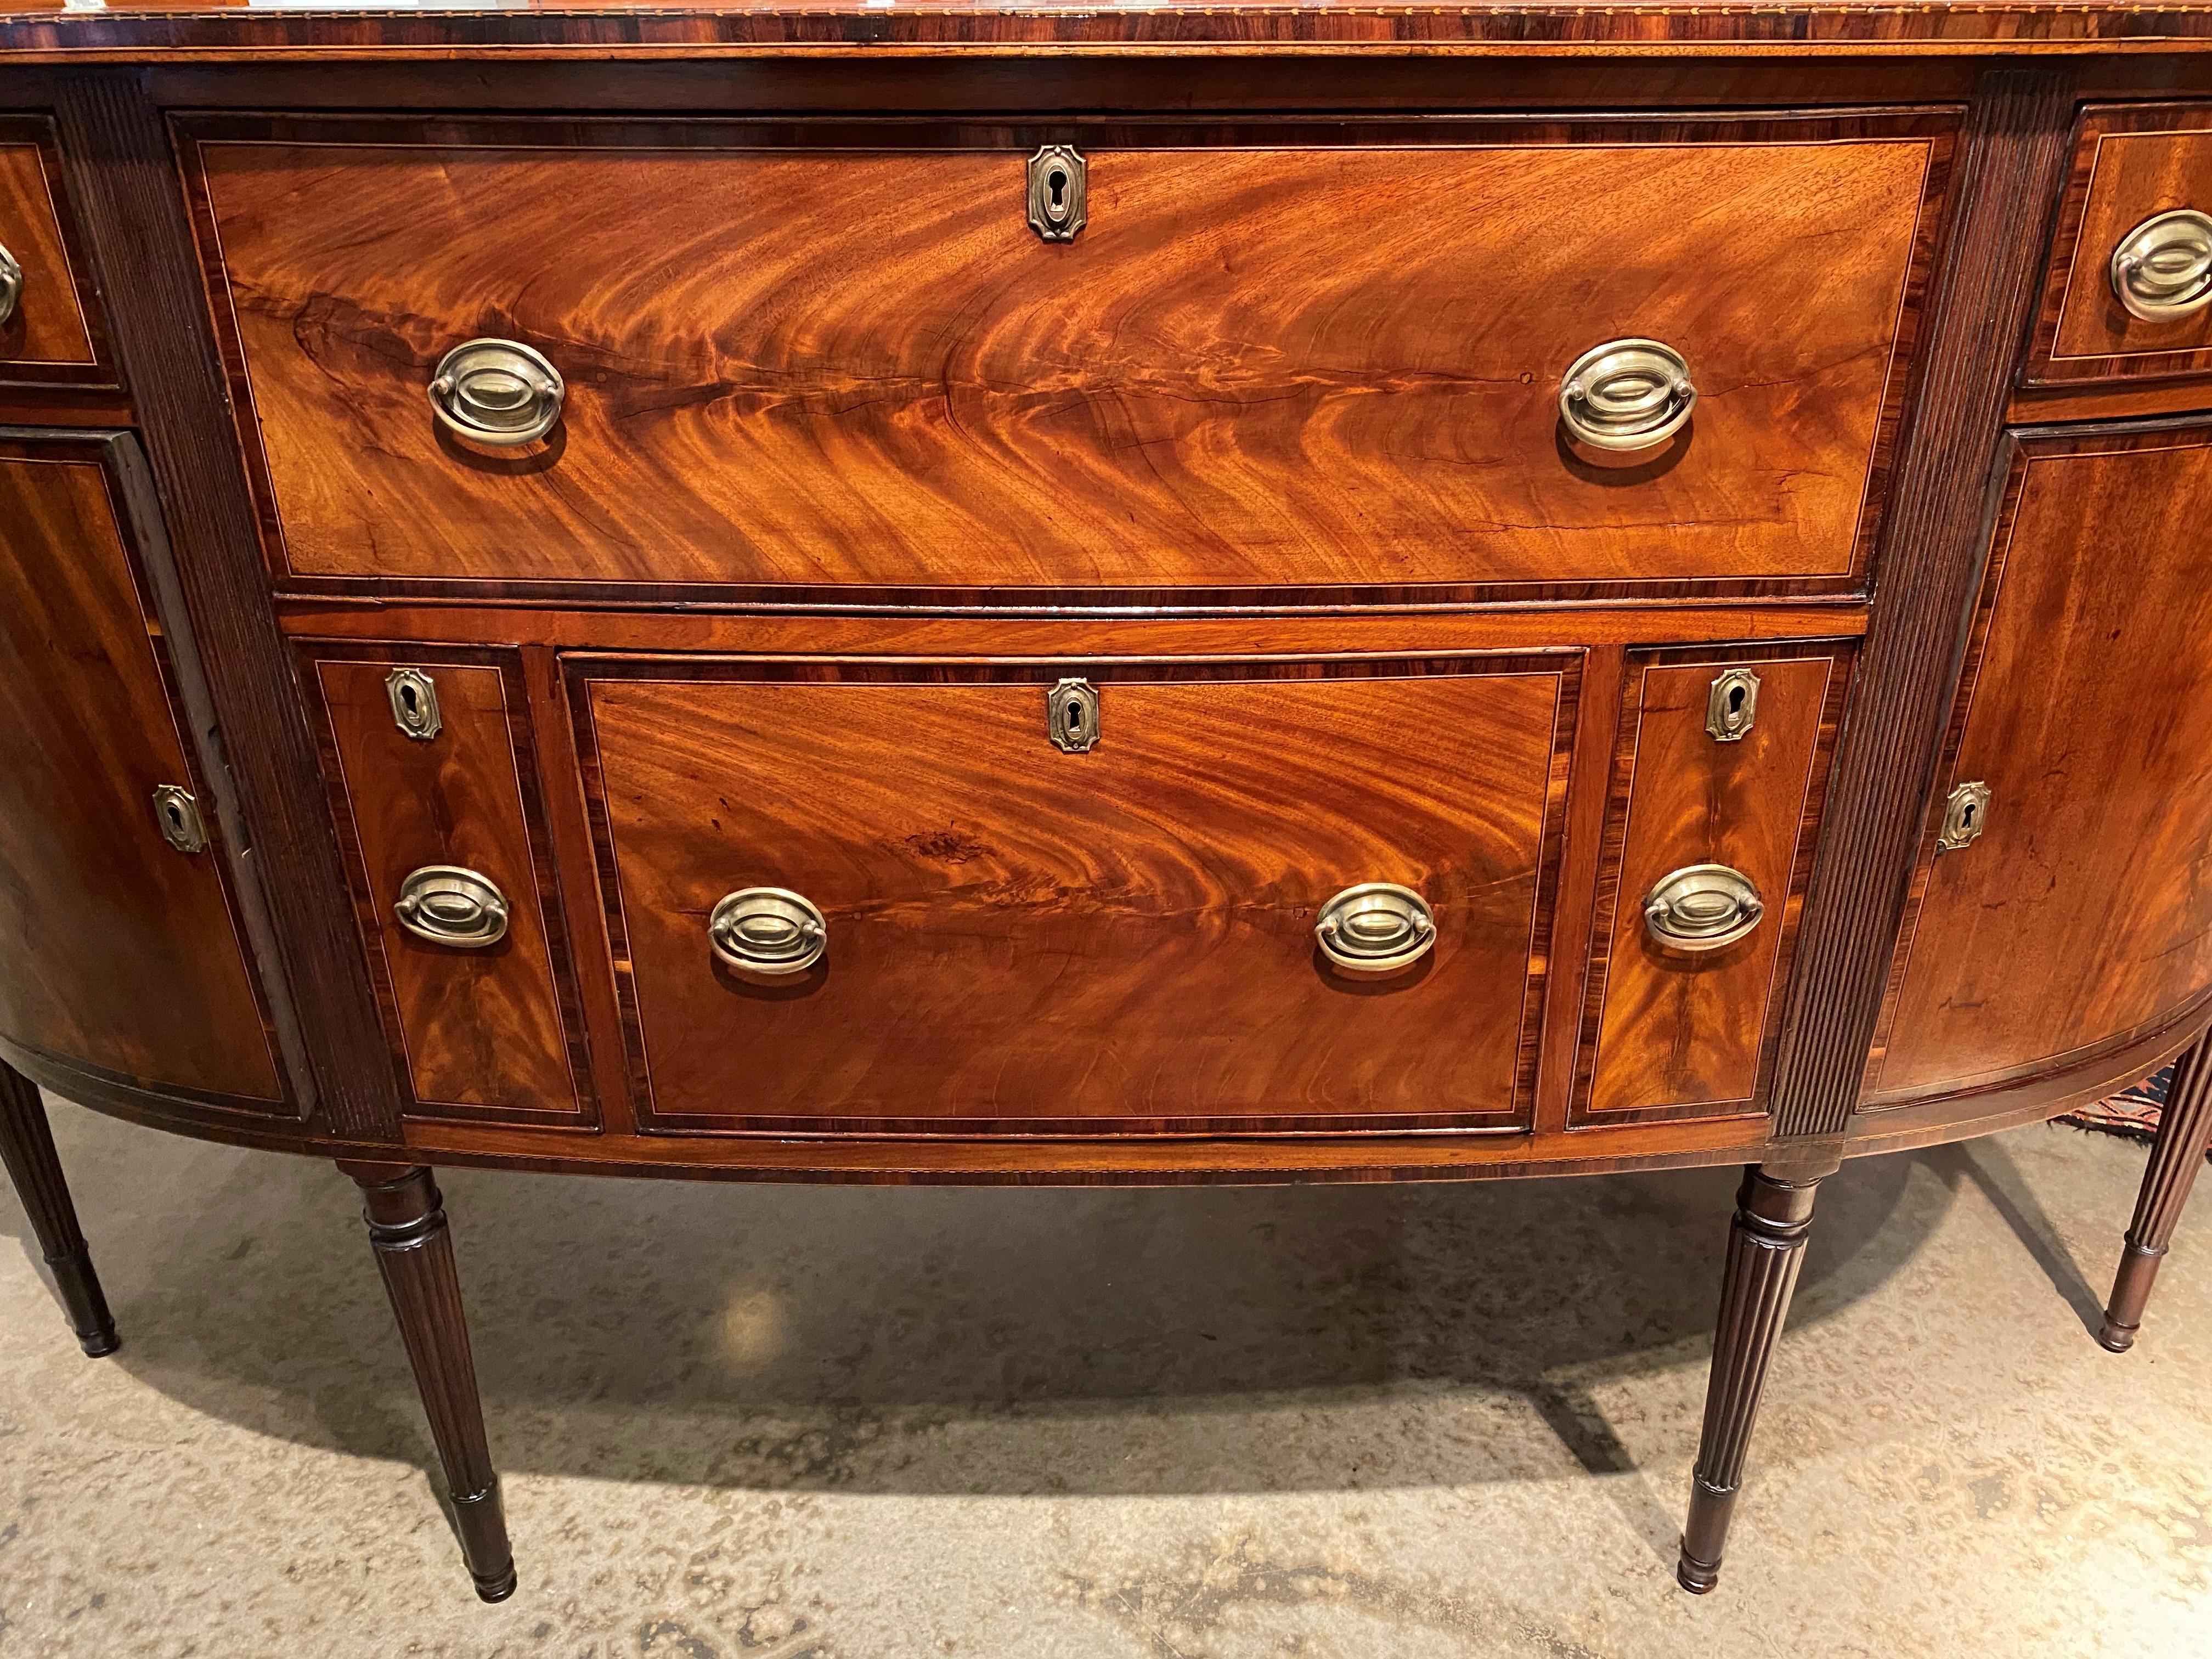 18th Century Federal Boston Mahogany Sideboard Attributed to the Seymour Workshop